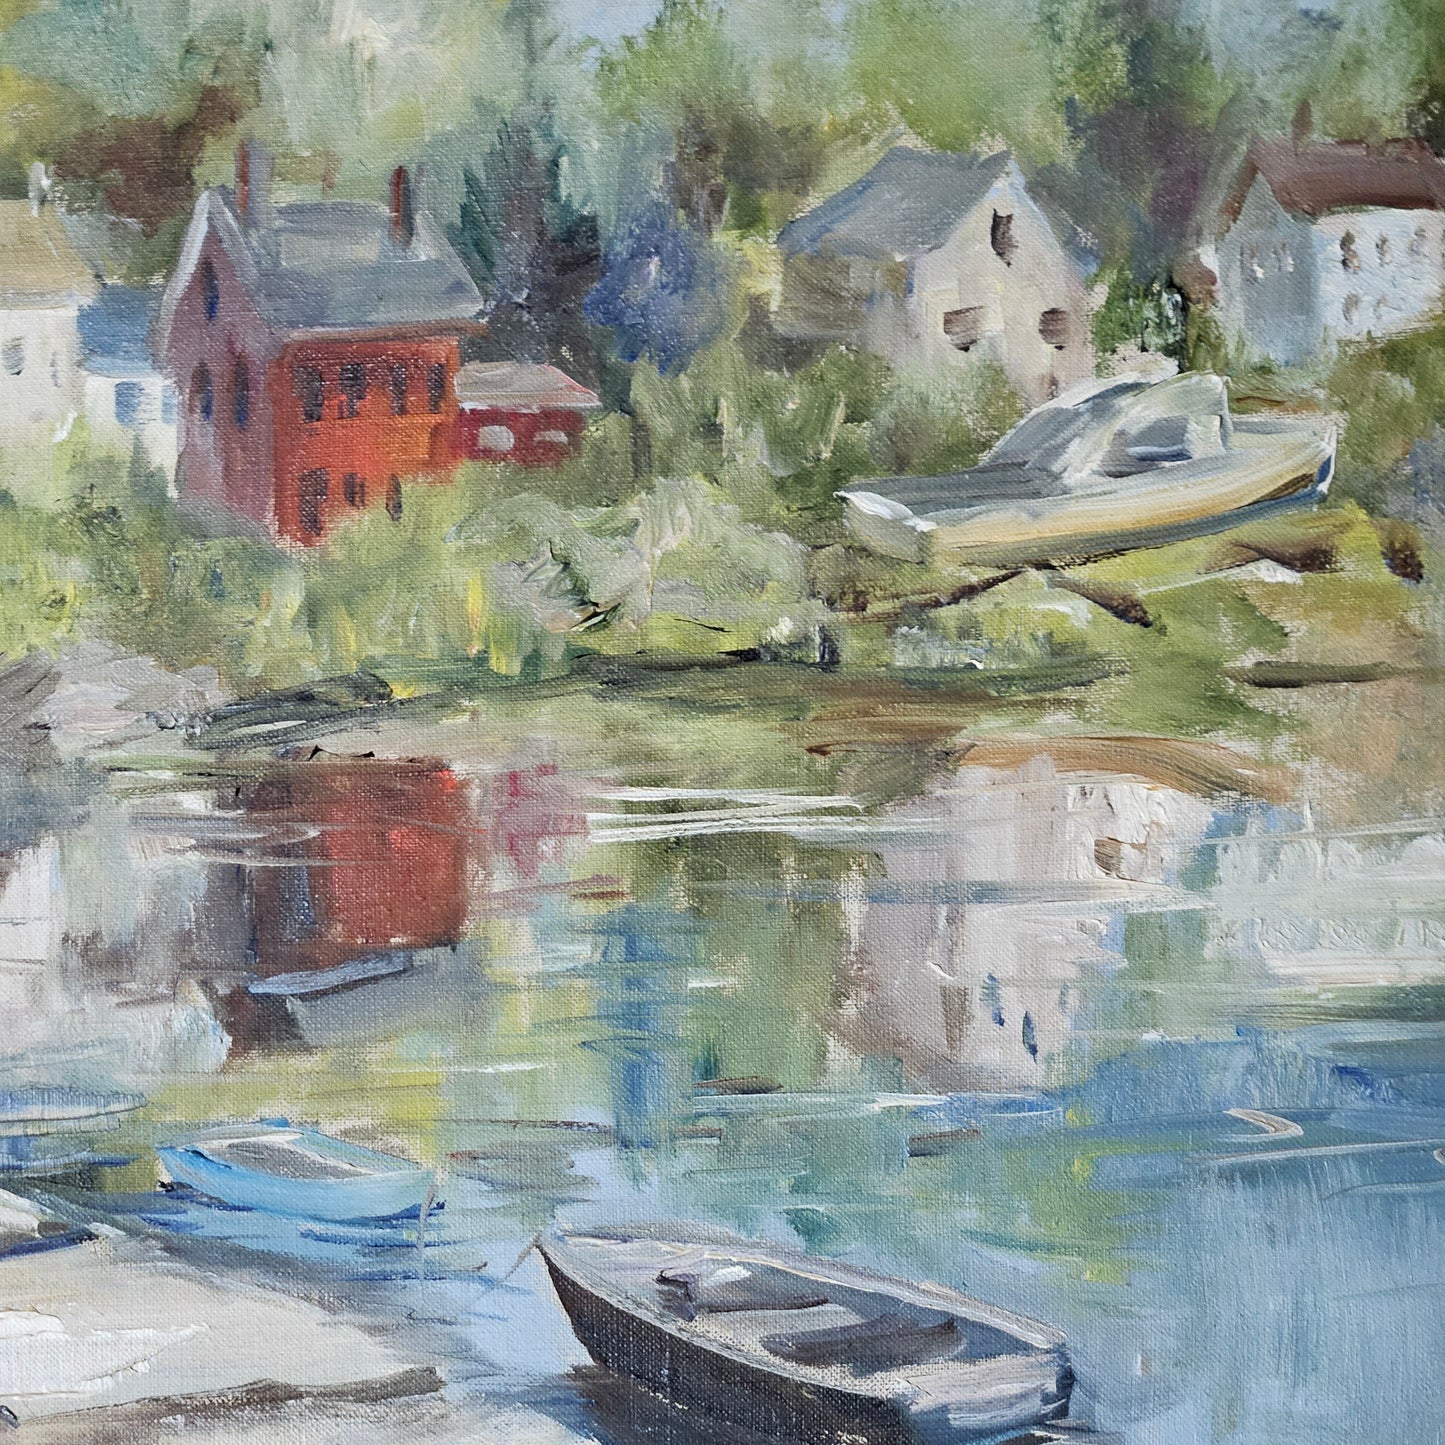 Original Constance Lefley Poulterer (American, 1920-2000) Painting on Canvas of Maine Fishing Village